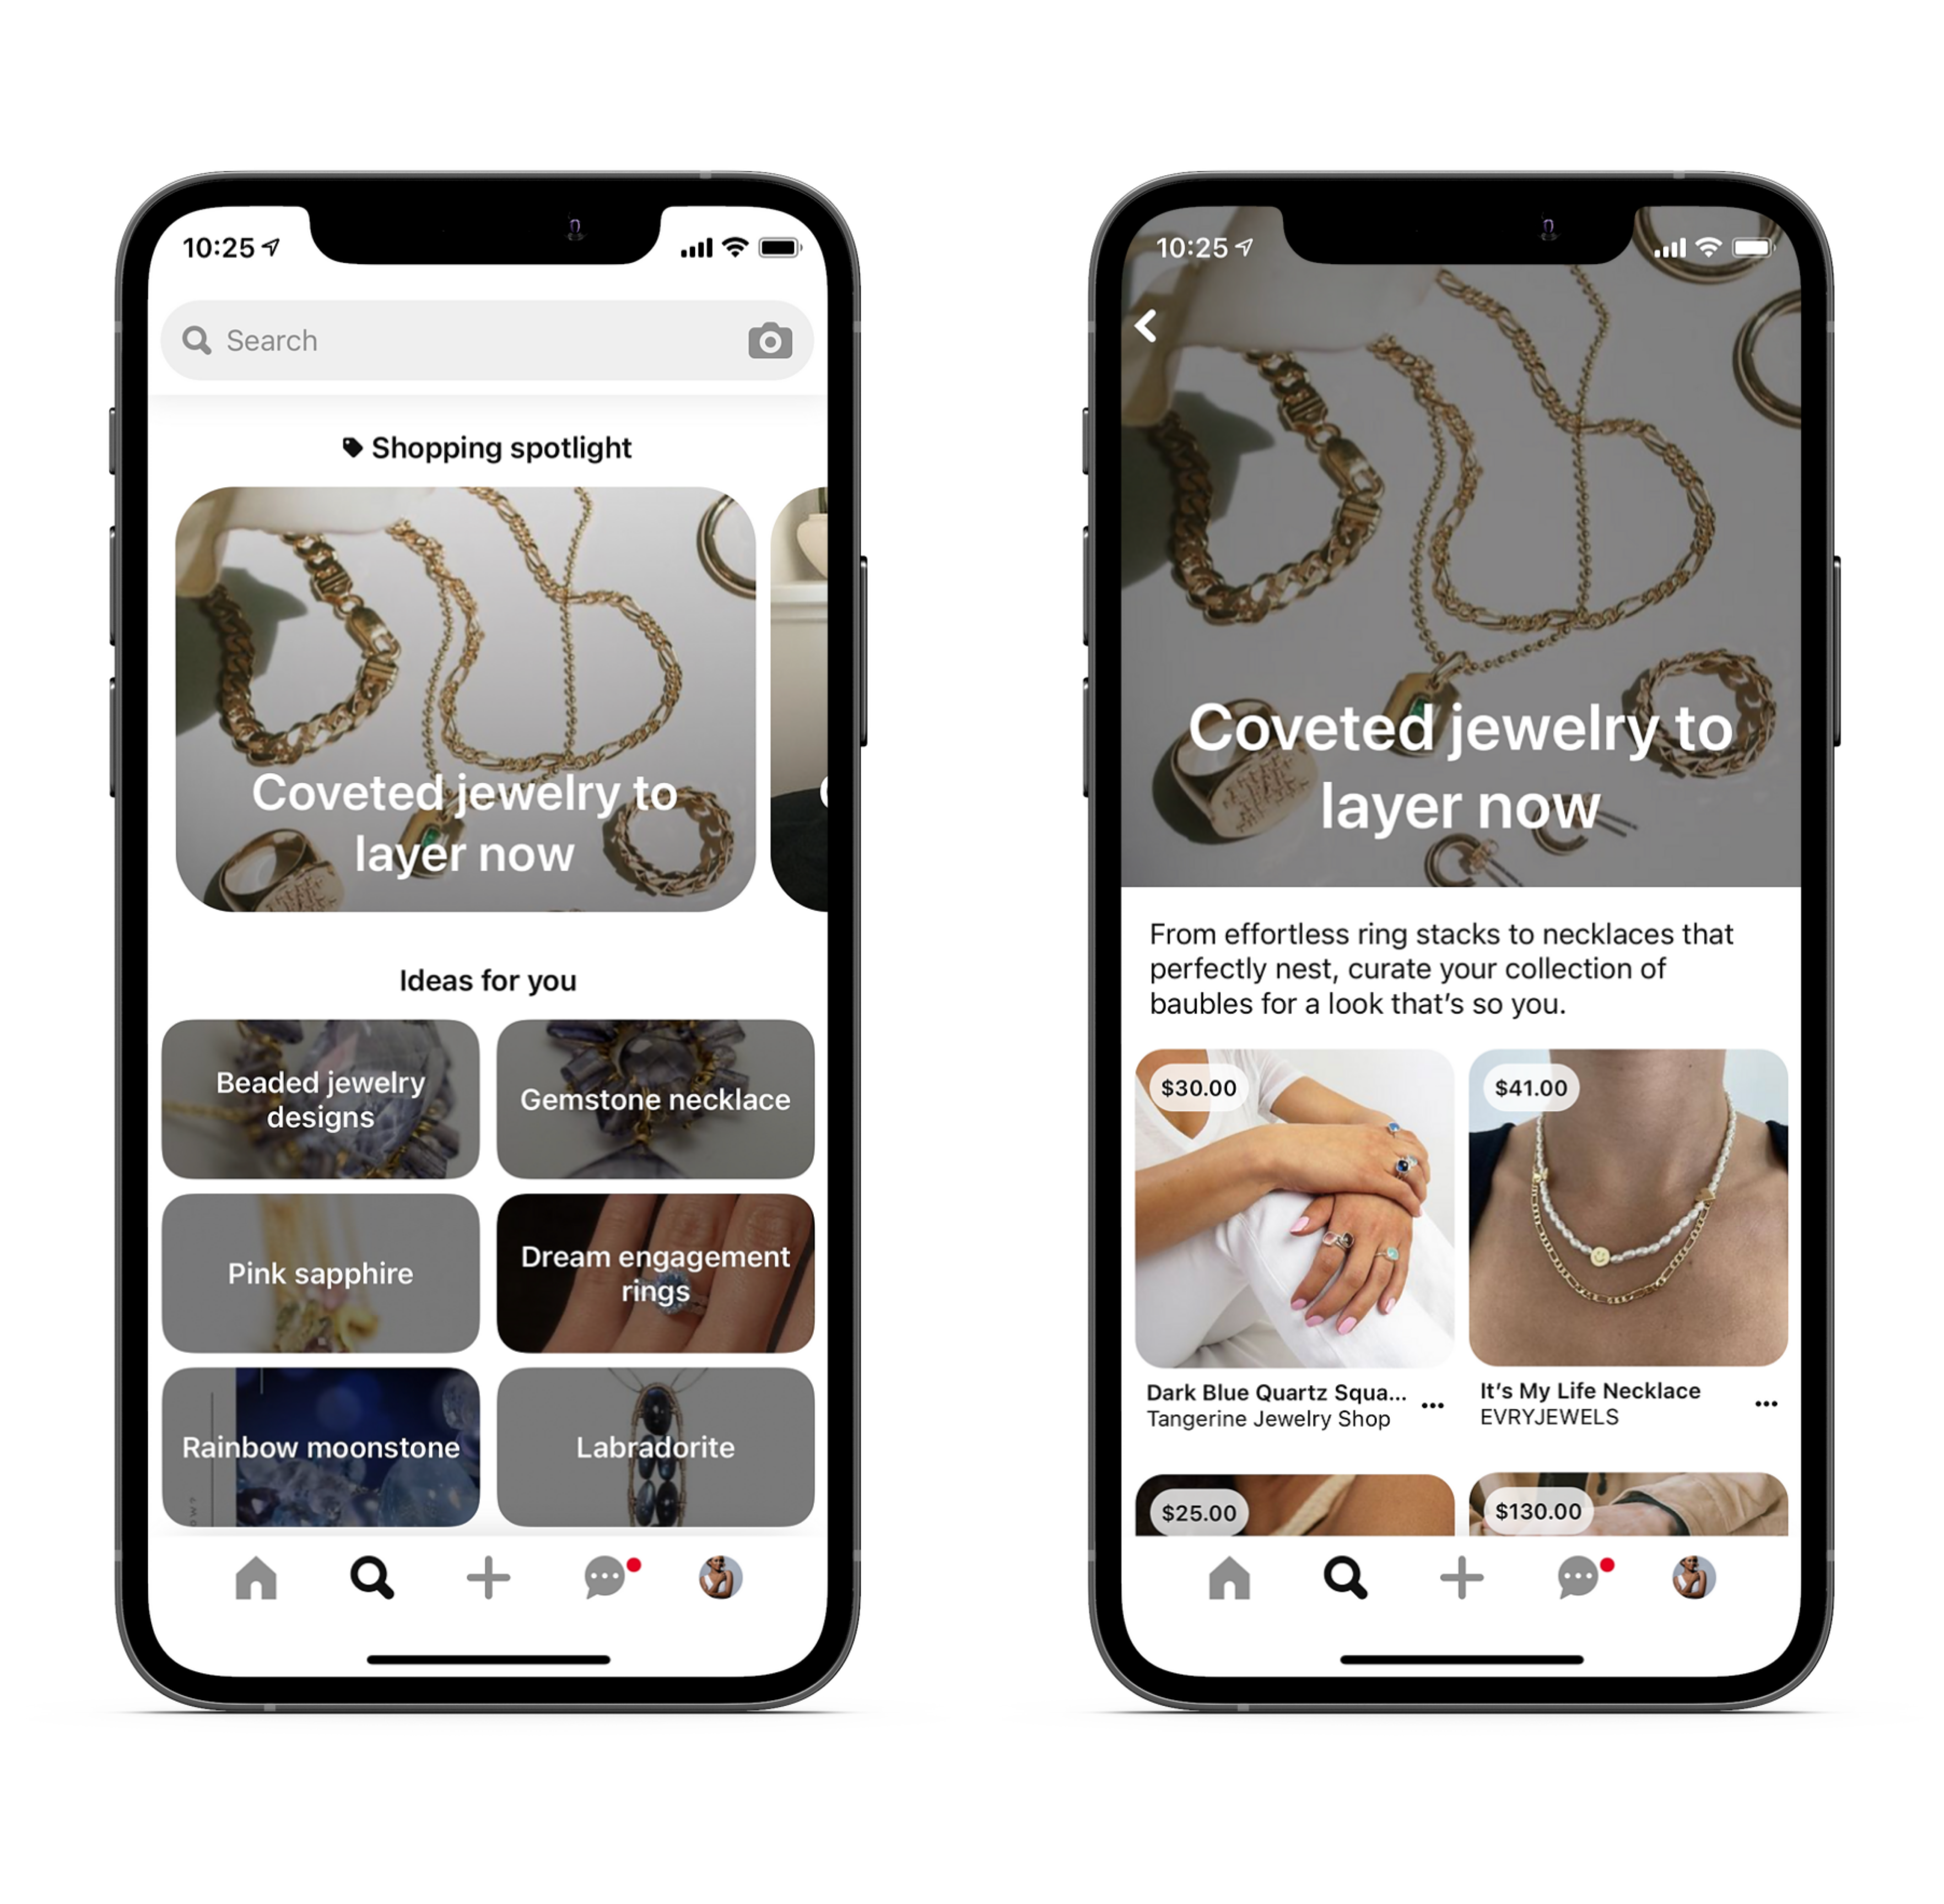 Screenshot of Iphone showing shopping spotlights feature on Pinterest